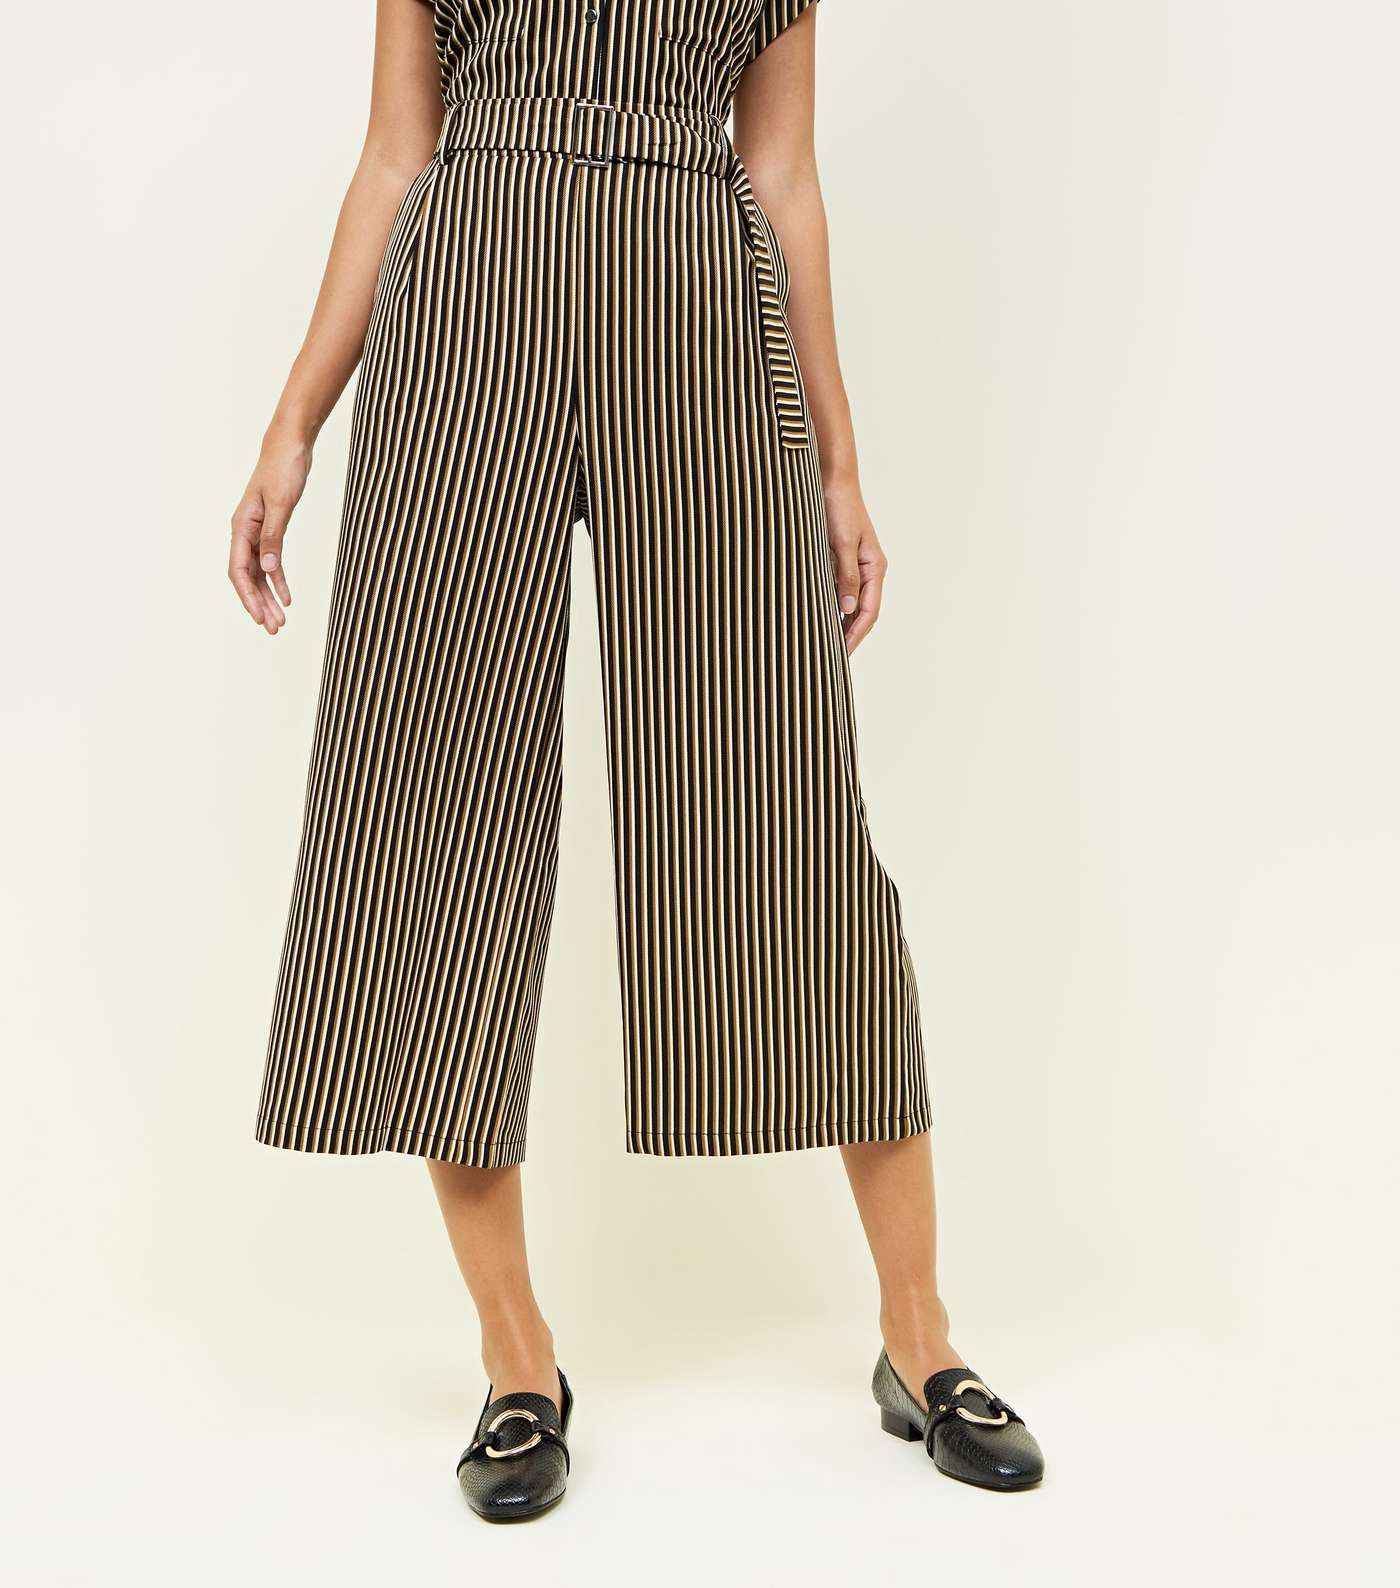 Black Stripe Twill Belted Culottes Image 2